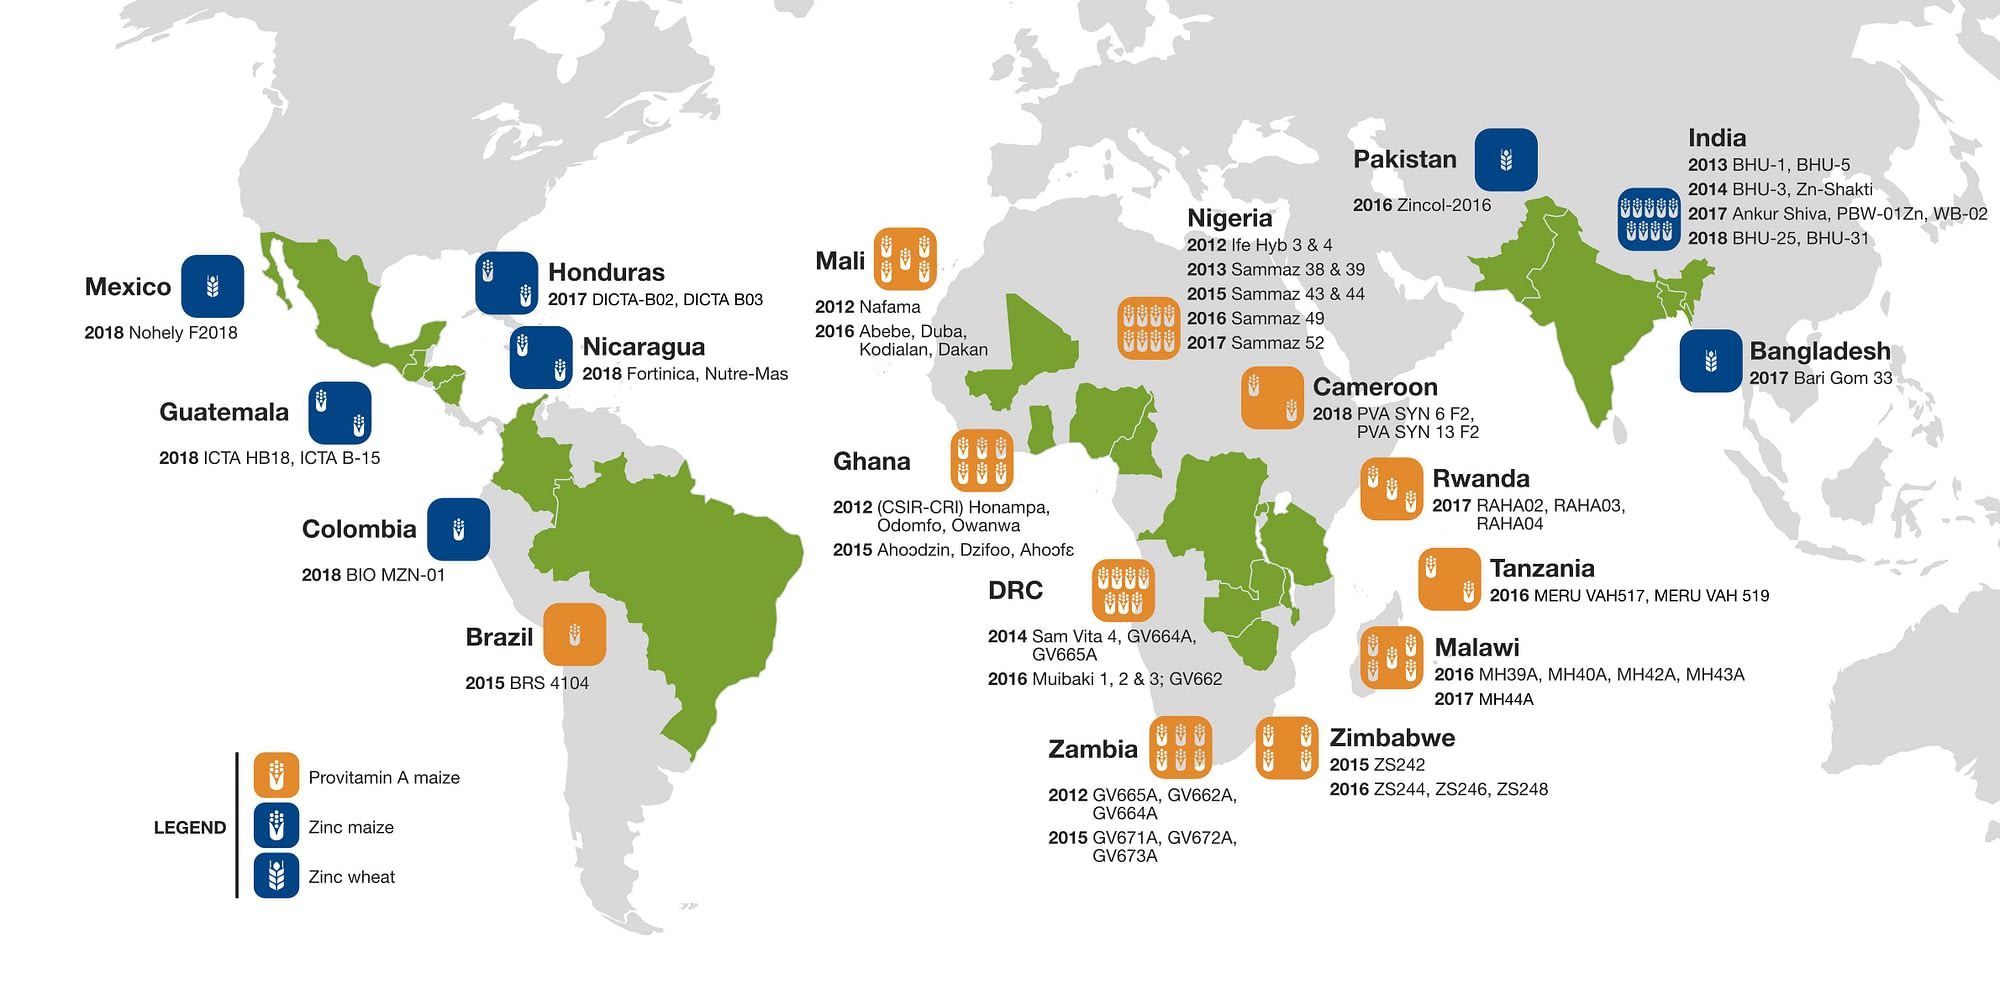 Farmer and consumer interest has grown for some 60 maize and wheat varieties whose grain features enhanced levels of the essential micronutrients zinc and provitamin A, developed and promoted through collaborations of CIMMYT, HarvestPlus, and partners in 19 countries (Map: Sam Storr/CIMMYT).